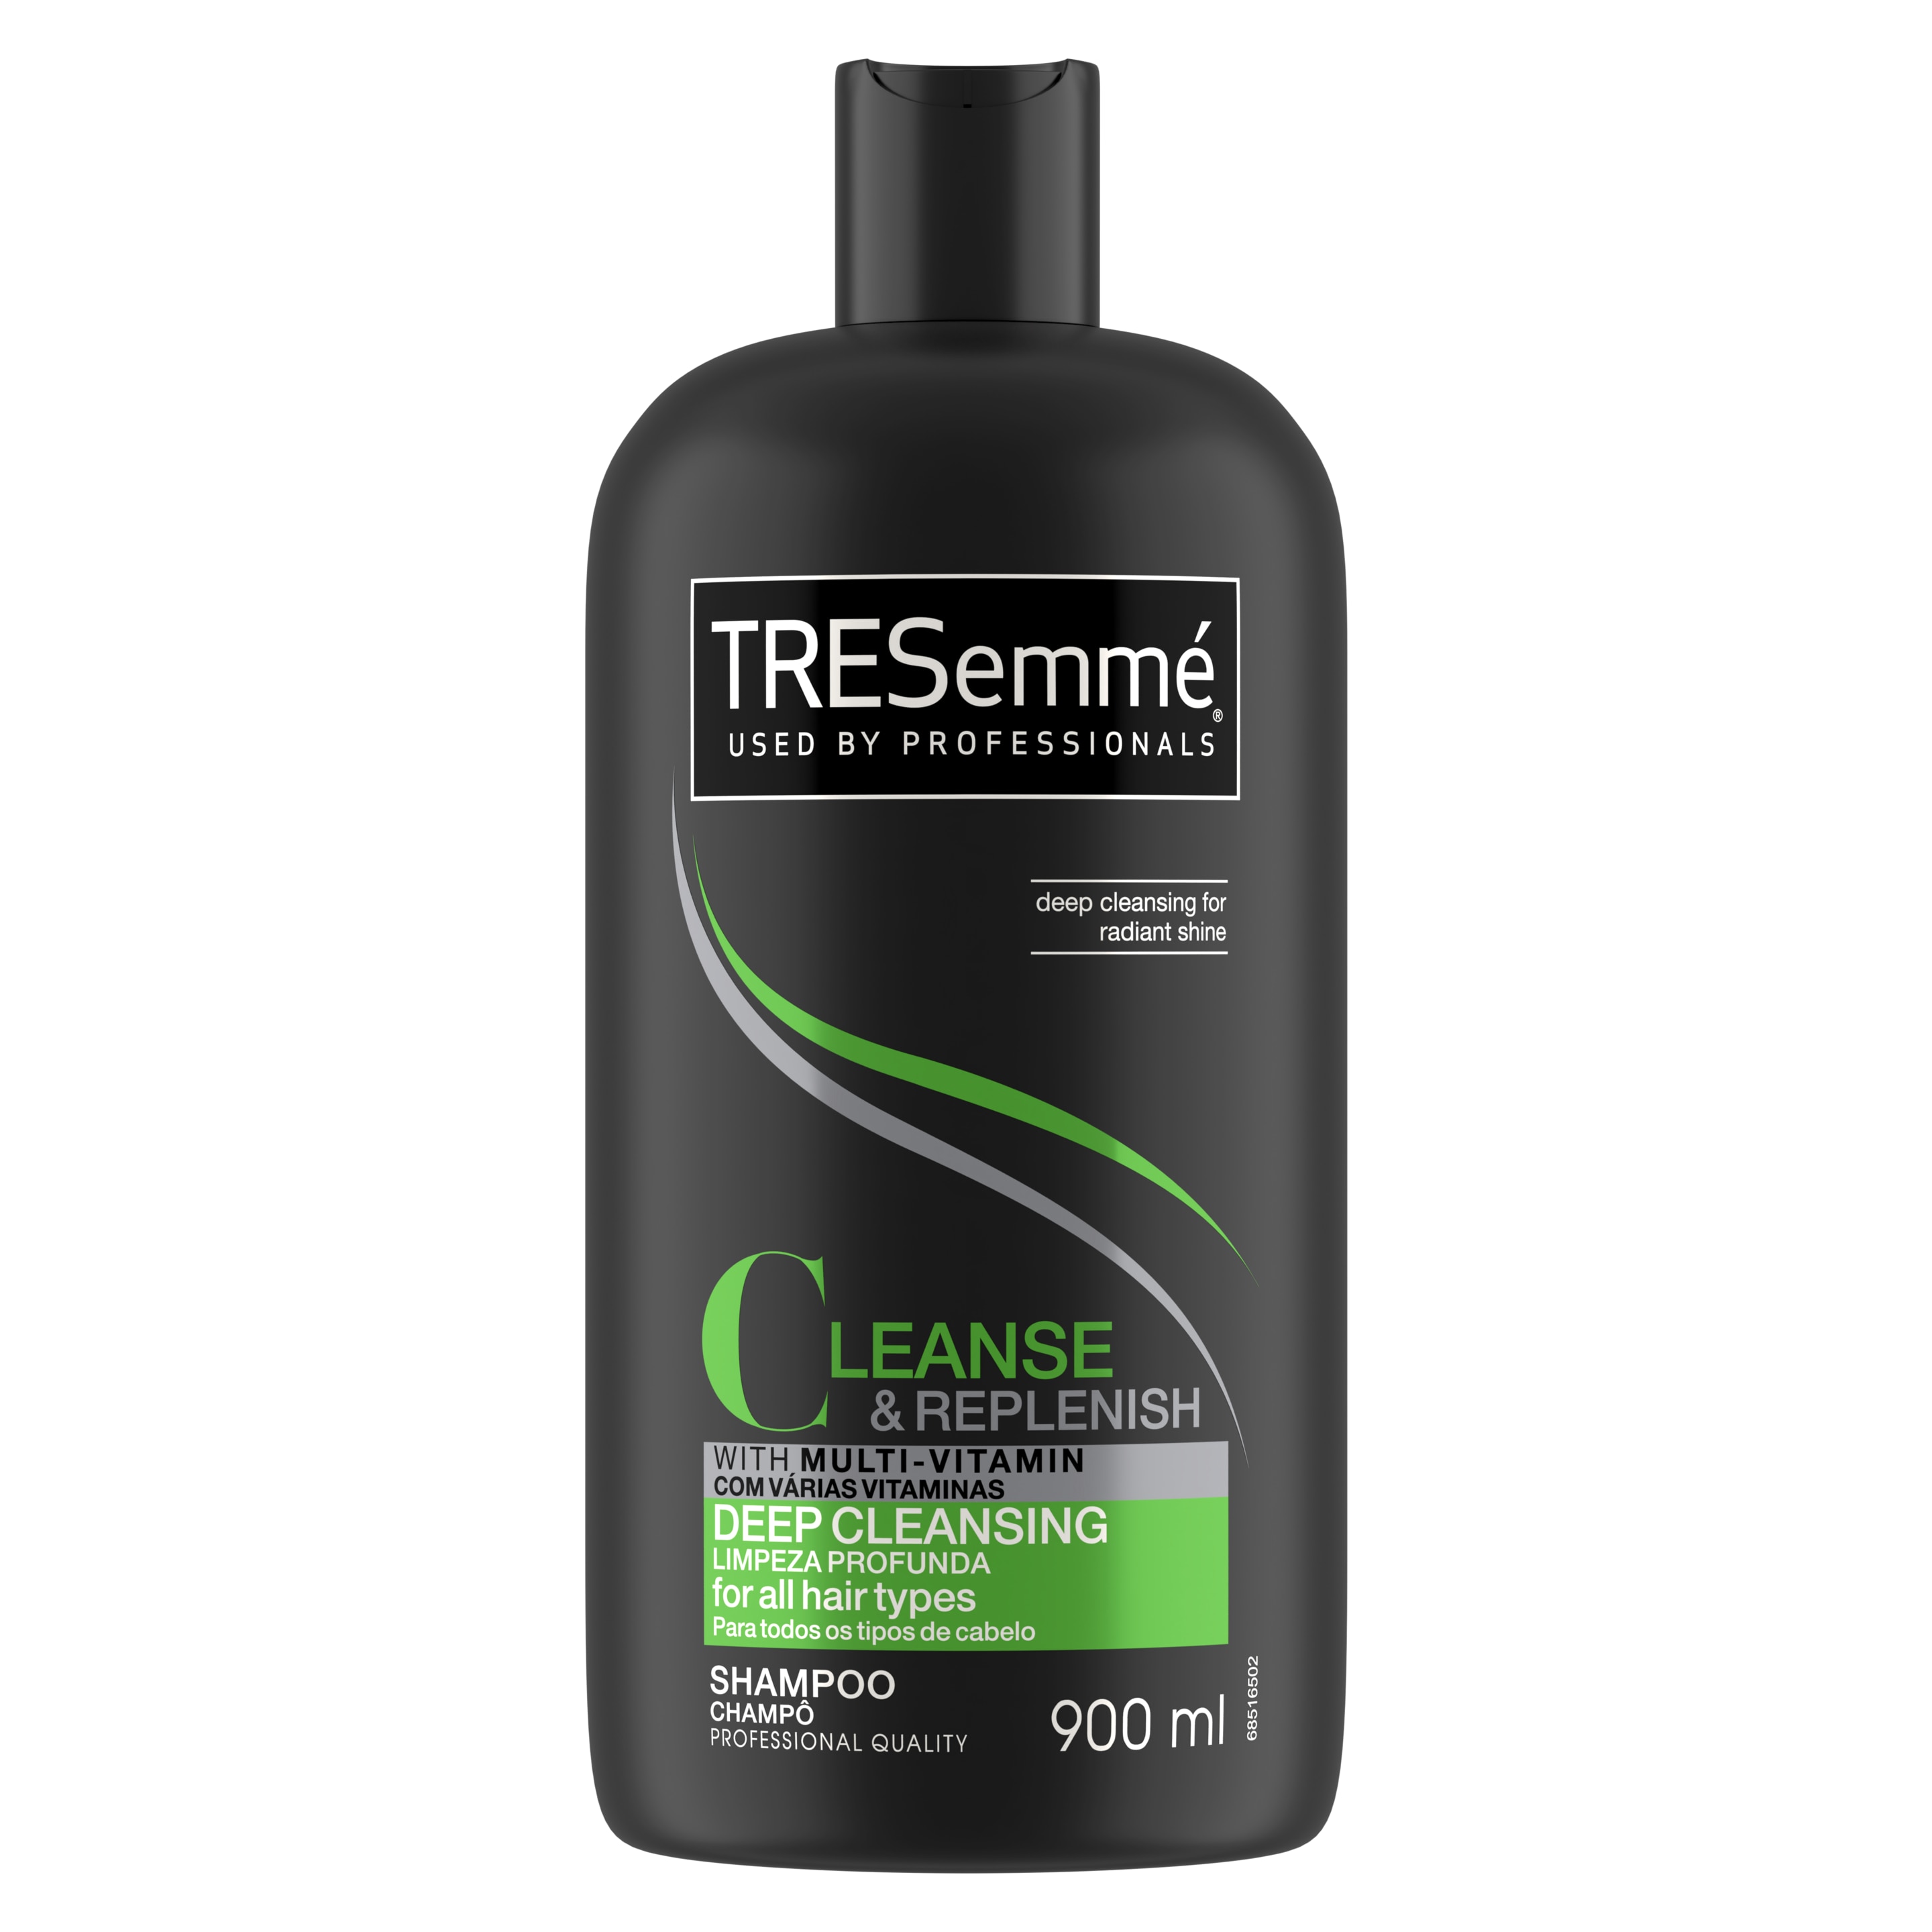 TRESemmé Cleanse and Replenish Shampoo 900ml Front of pack image